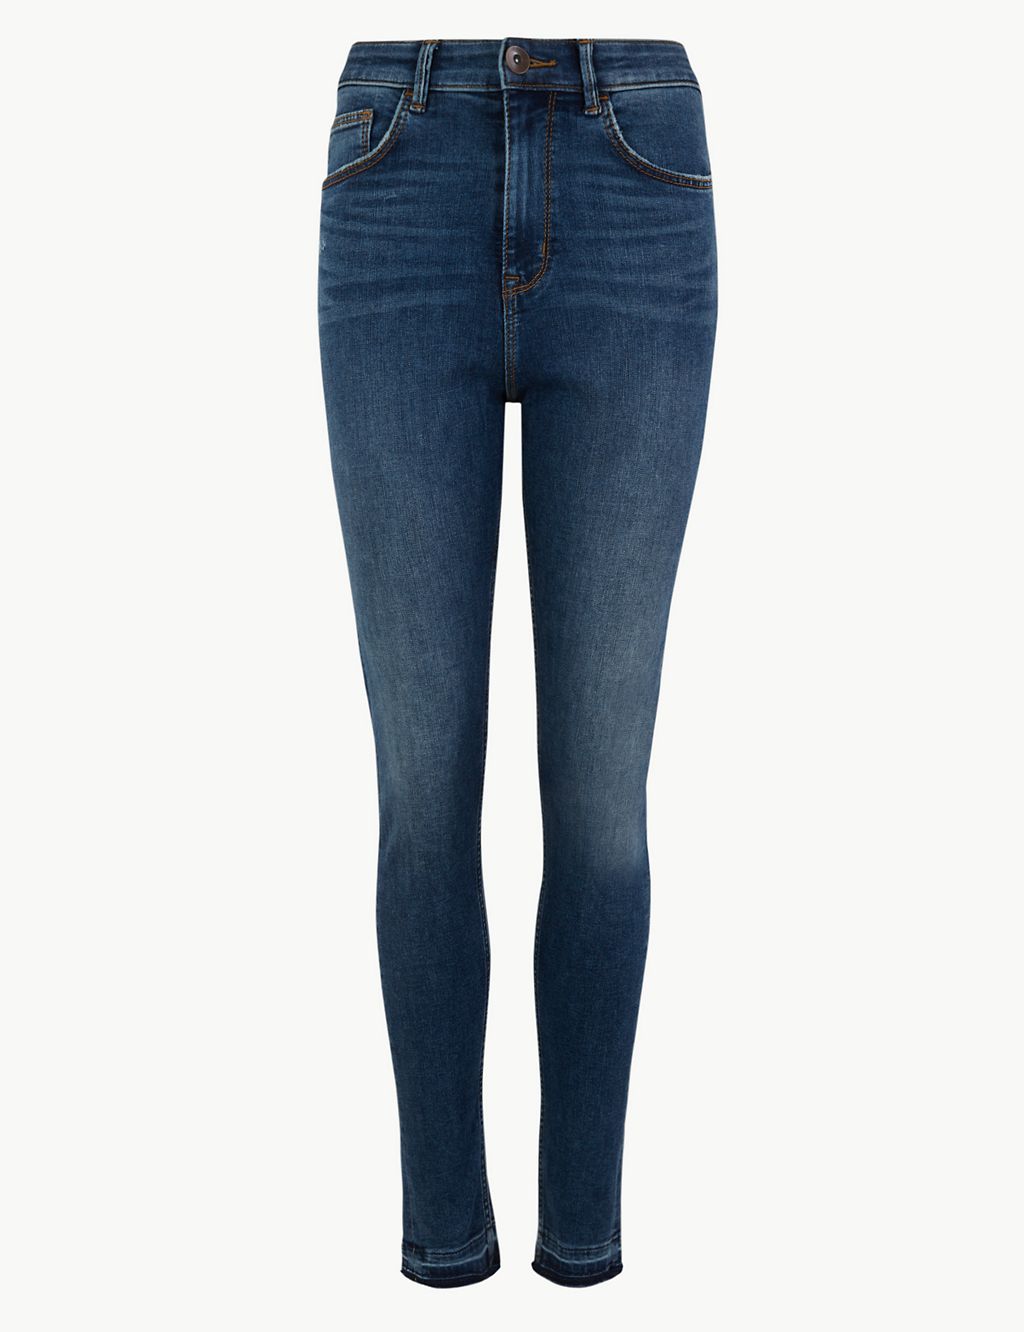 Carrie High Waisted Skinny Jeans 1 of 5